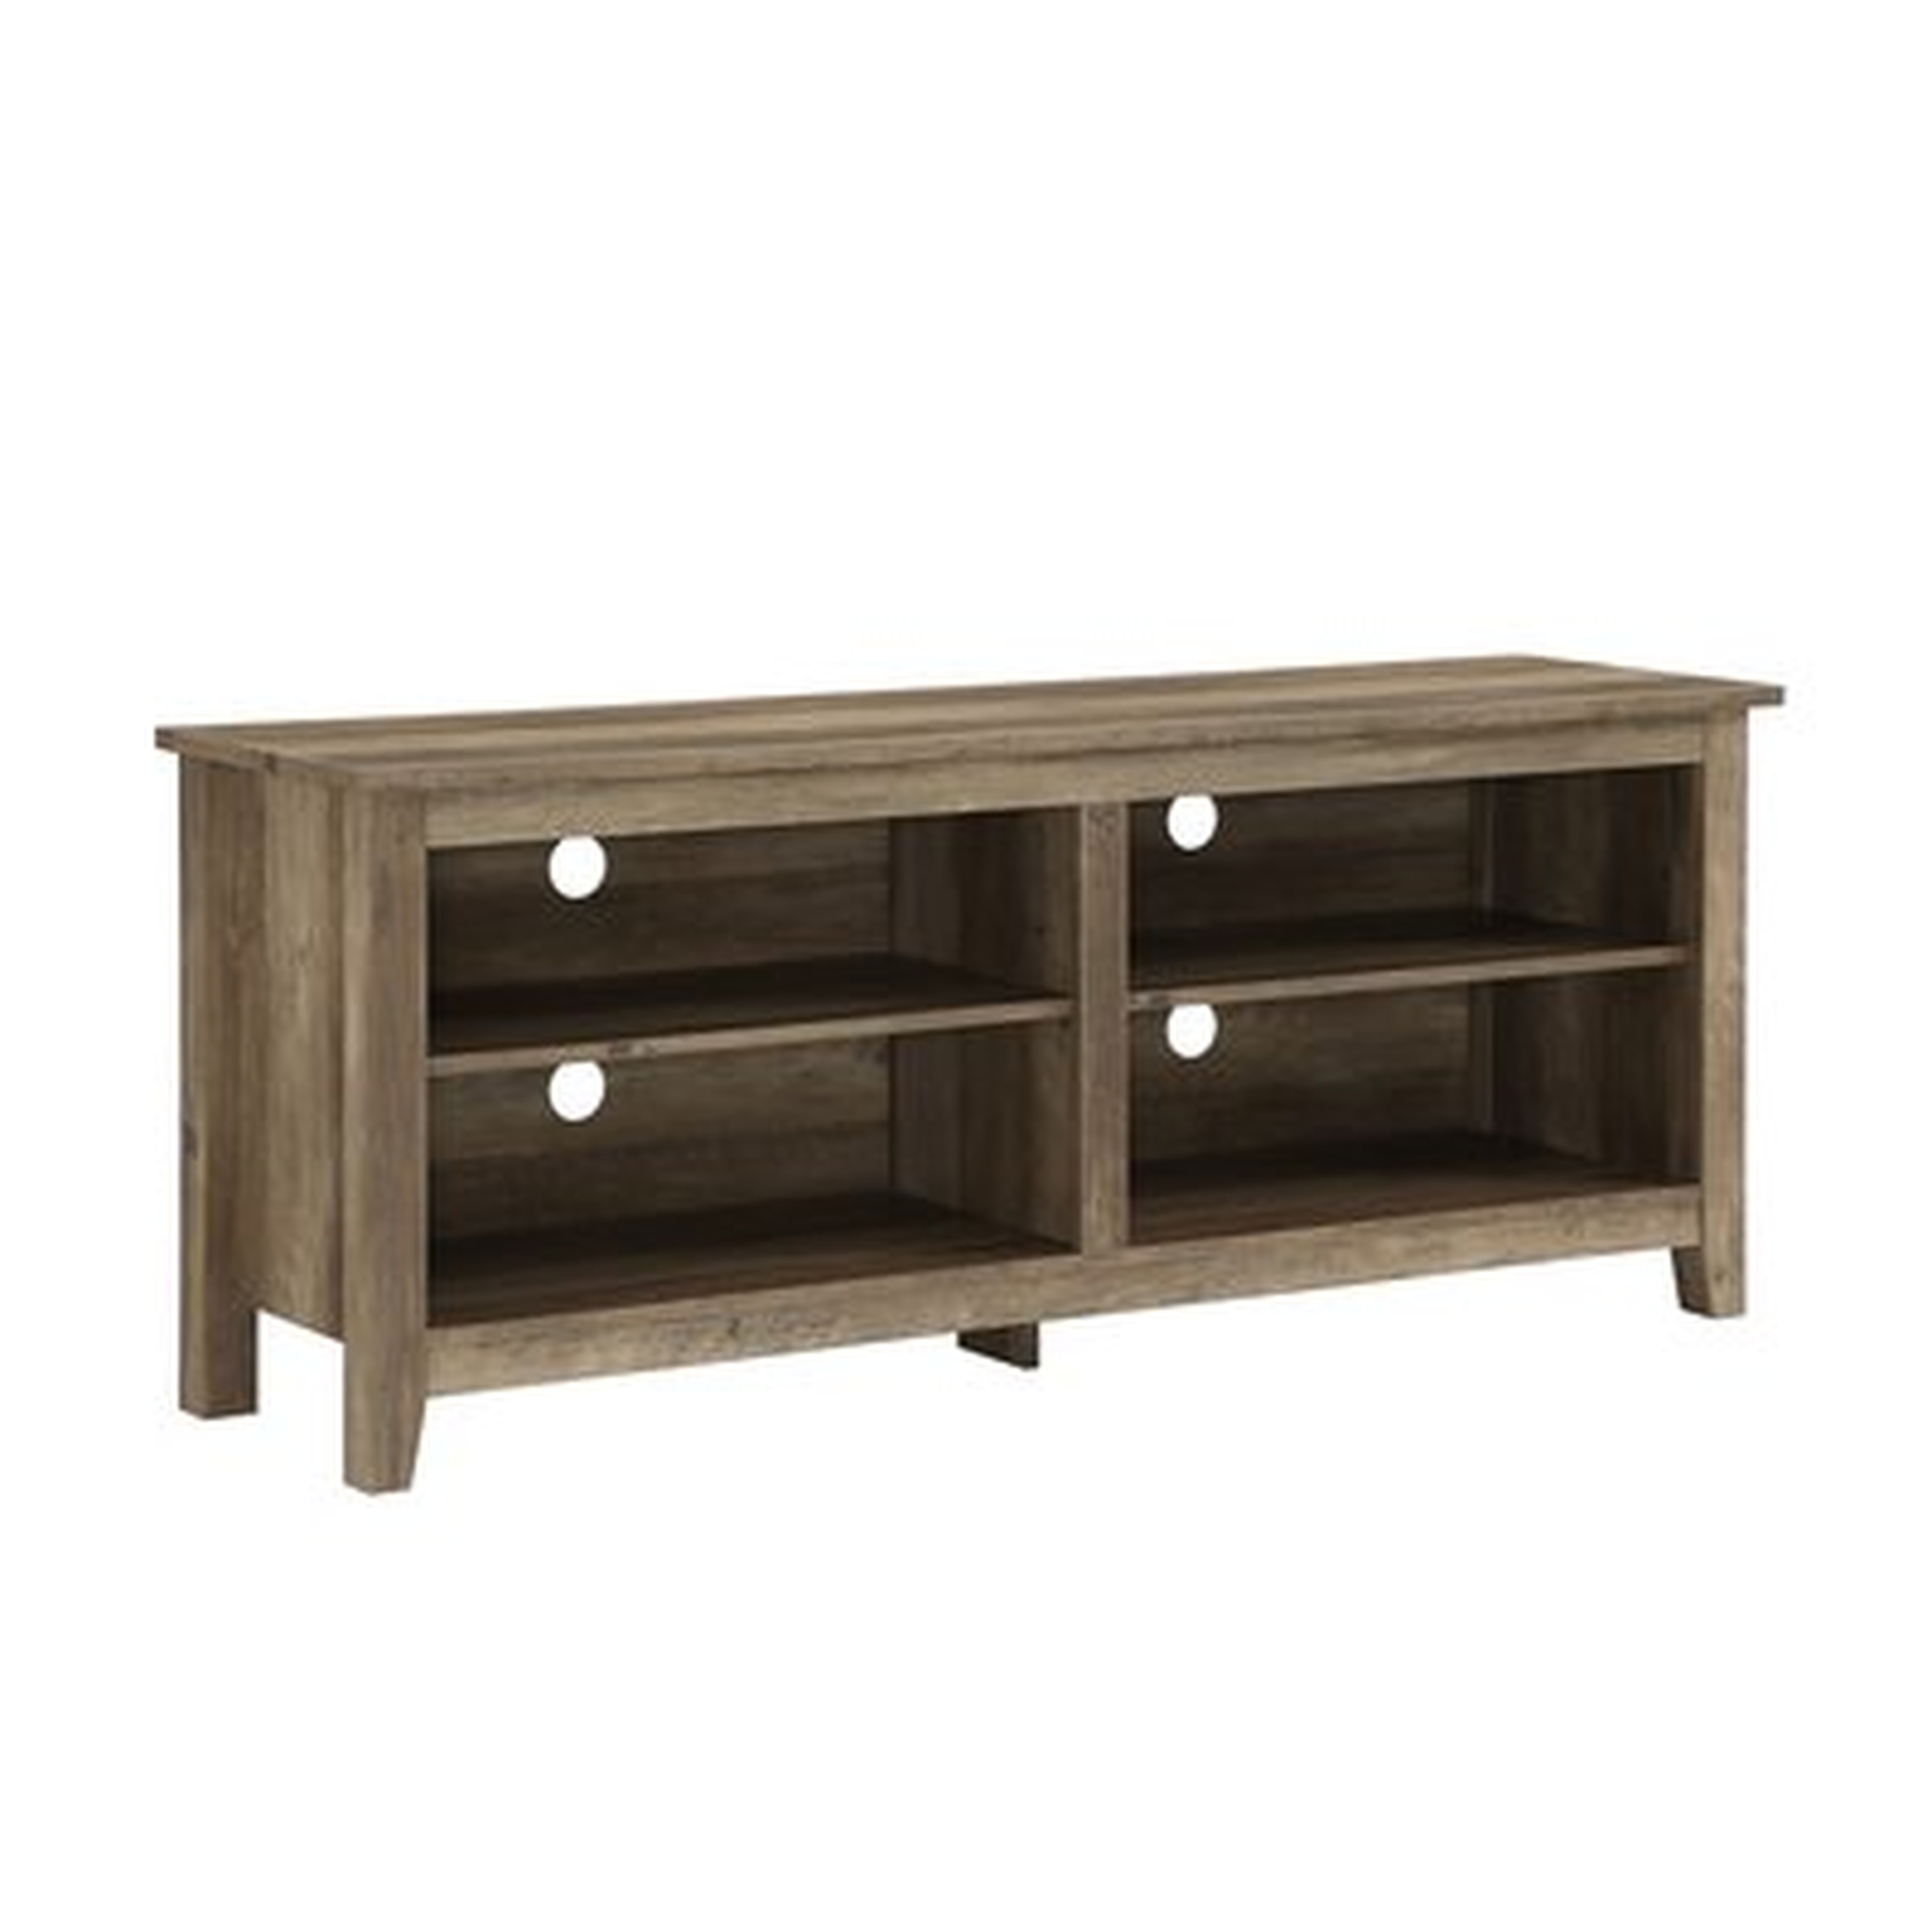 Sunbury TV Stand for TVs up to 65 inches - Birch Lane